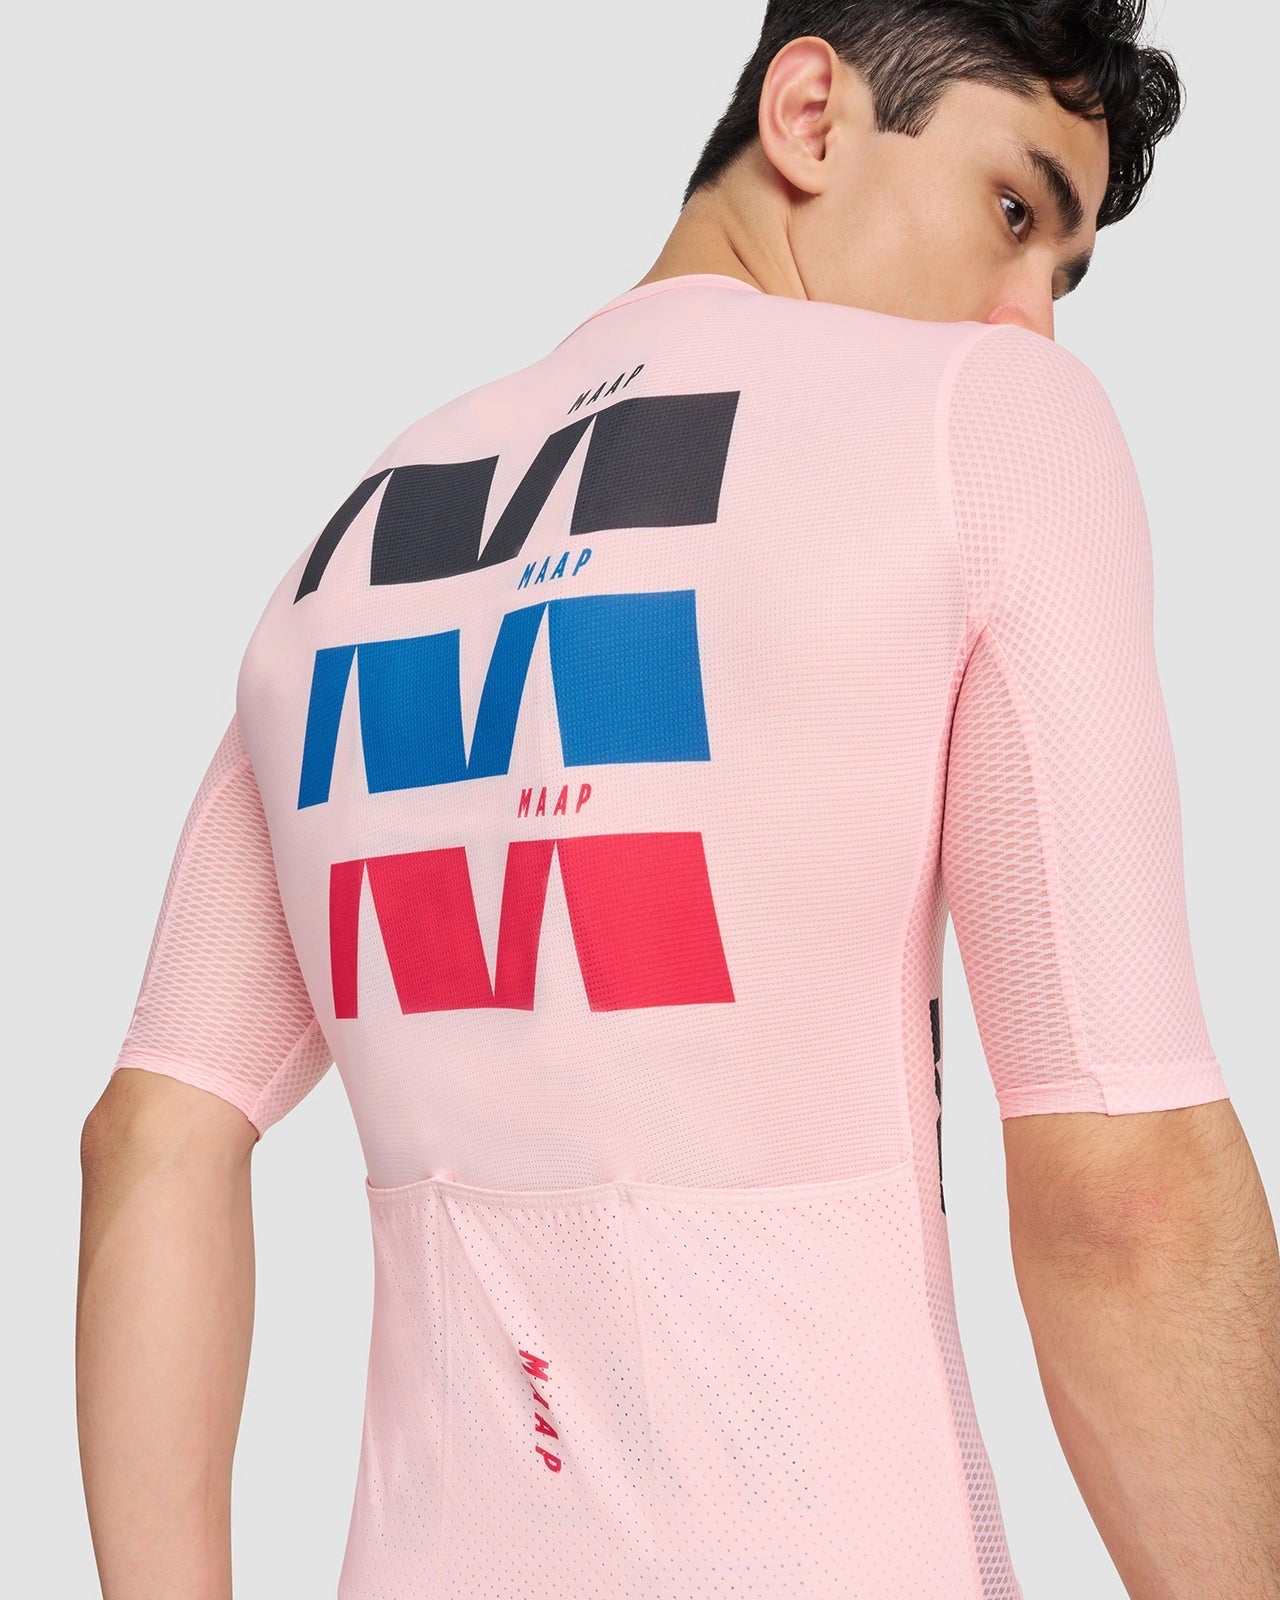 Trace Pro Air Jersey - Pale Pink